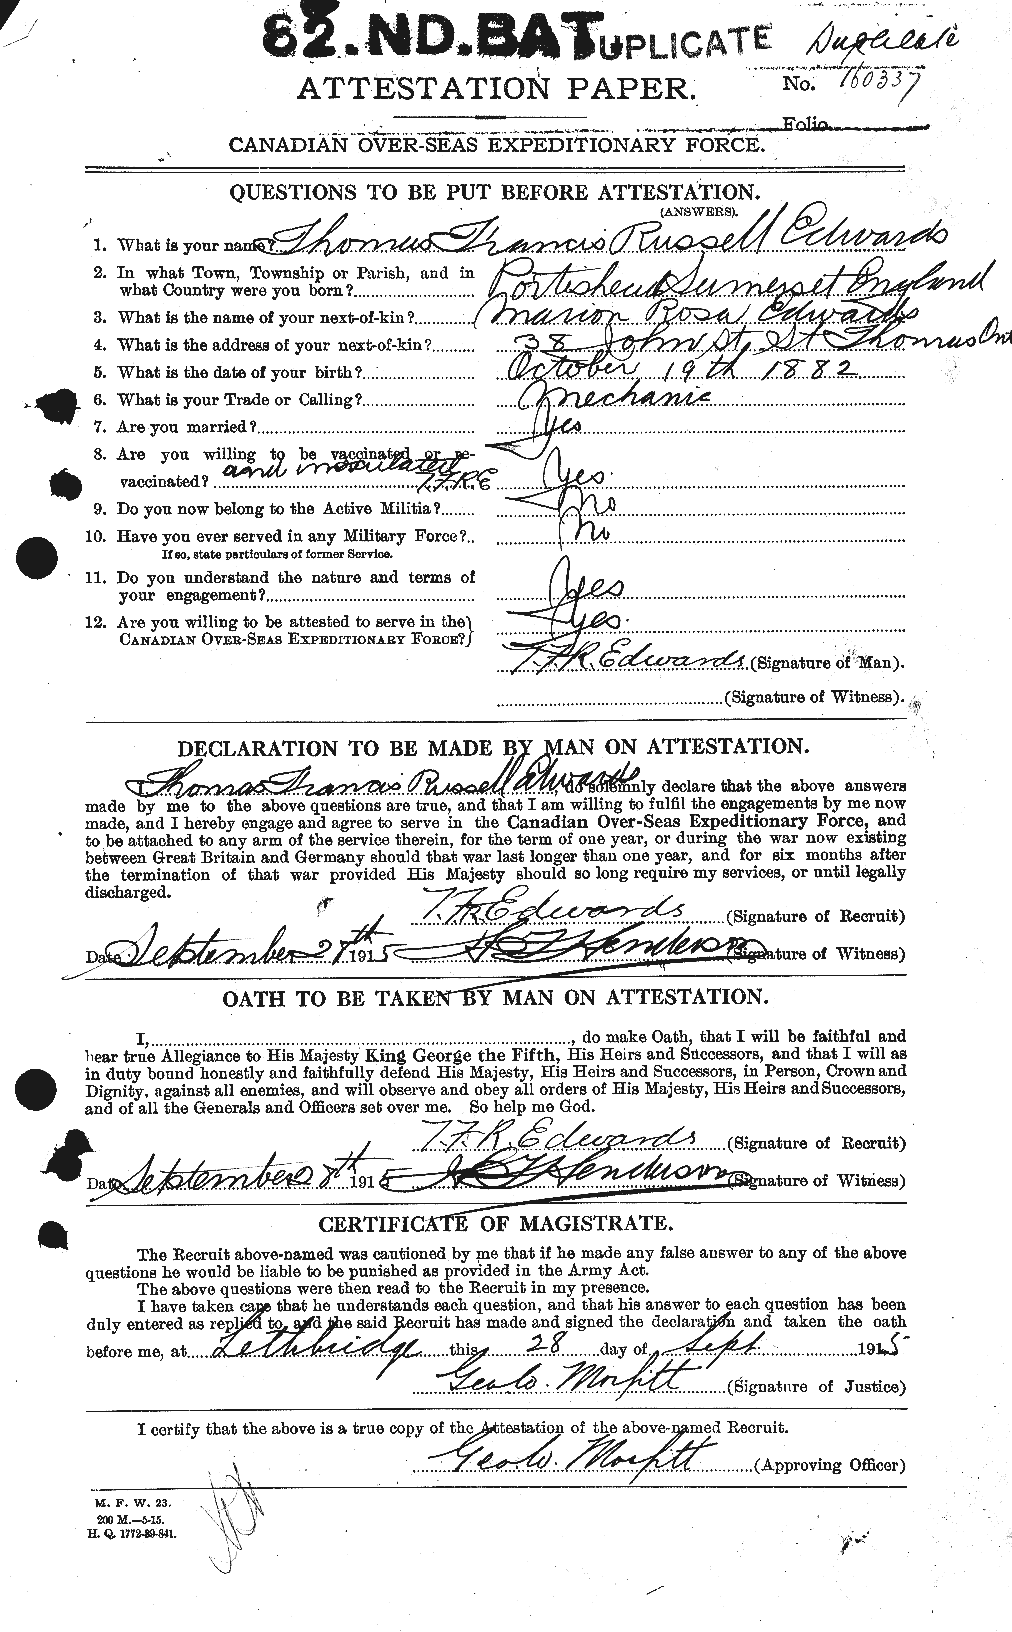 Personnel Records of the First World War - CEF 310357a